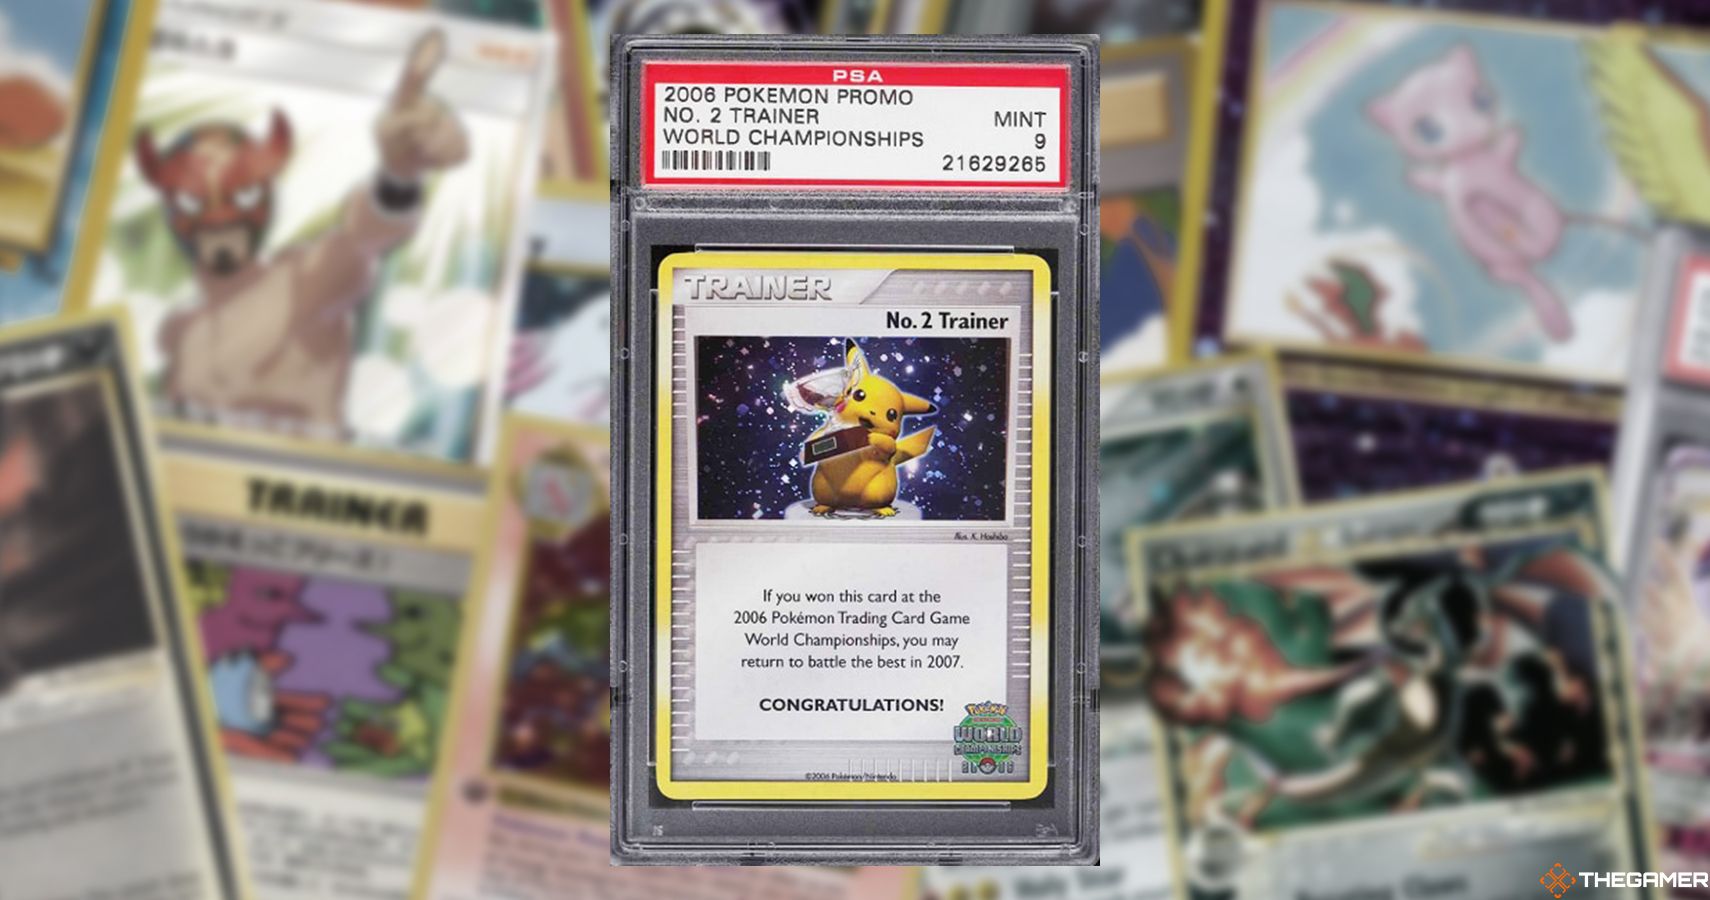 A guide to rare and valuable vintage Pokémon cards